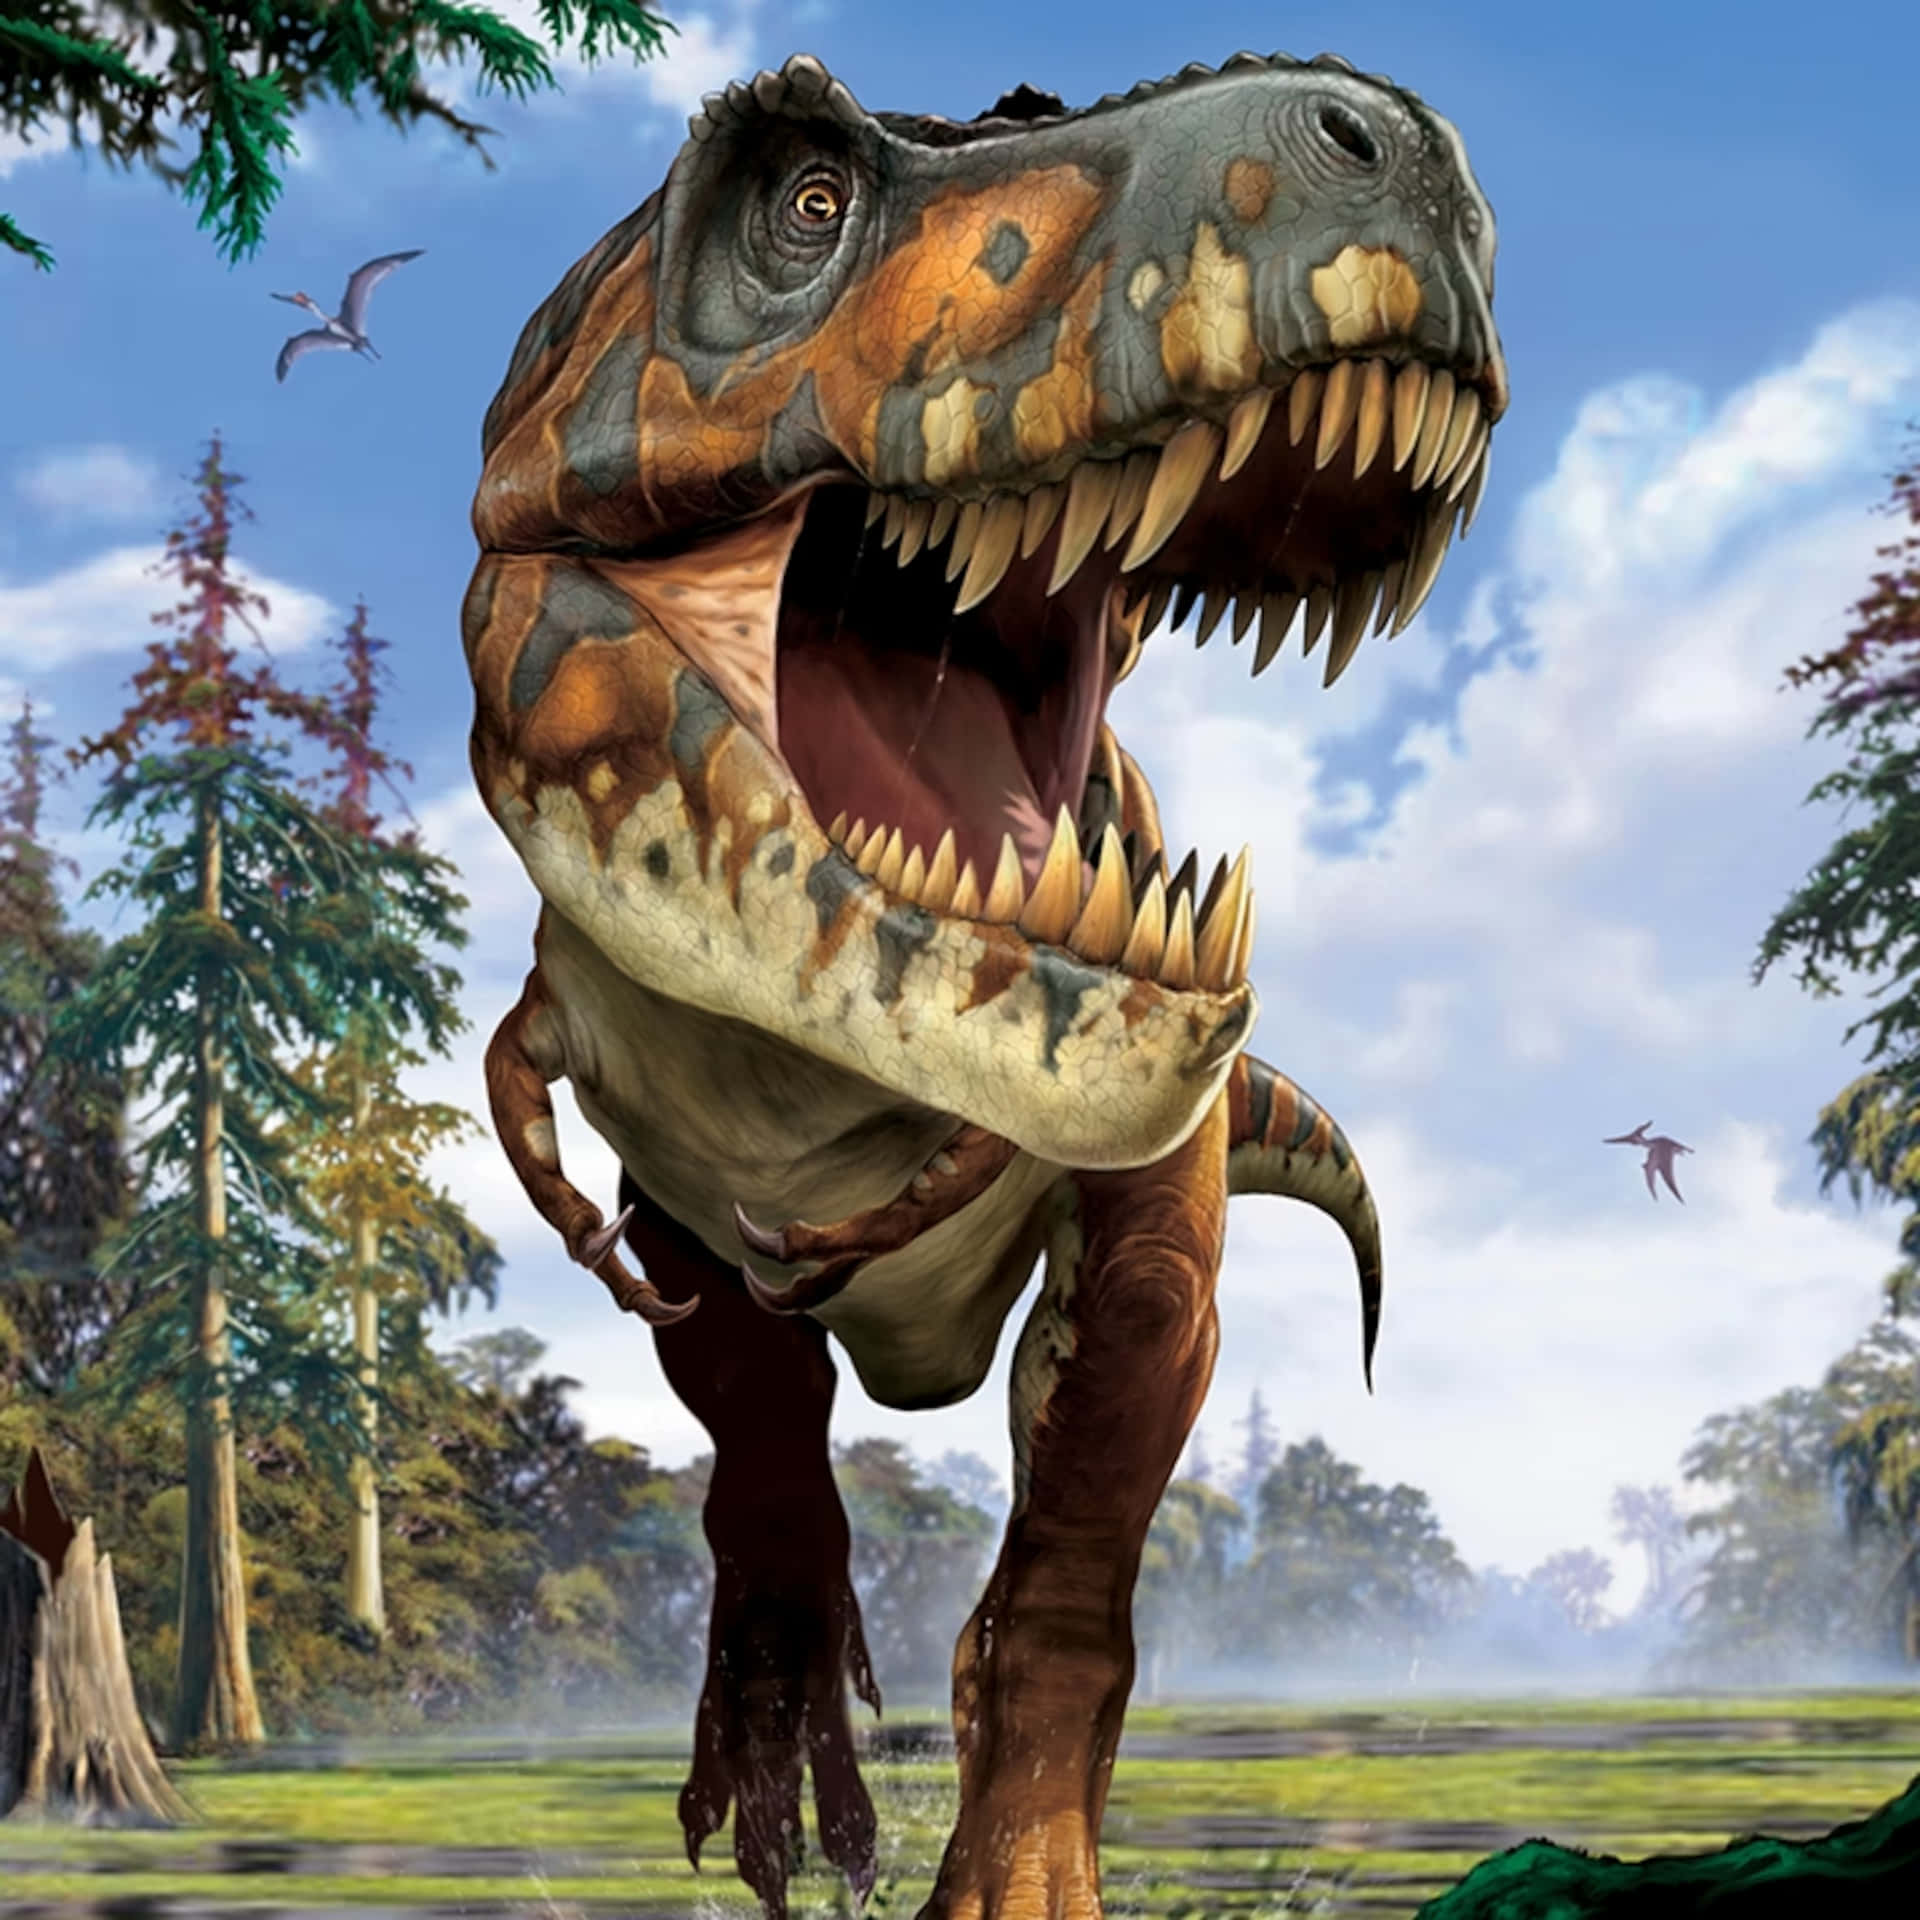 A red-eyed T-Rex overlooking its kingdom